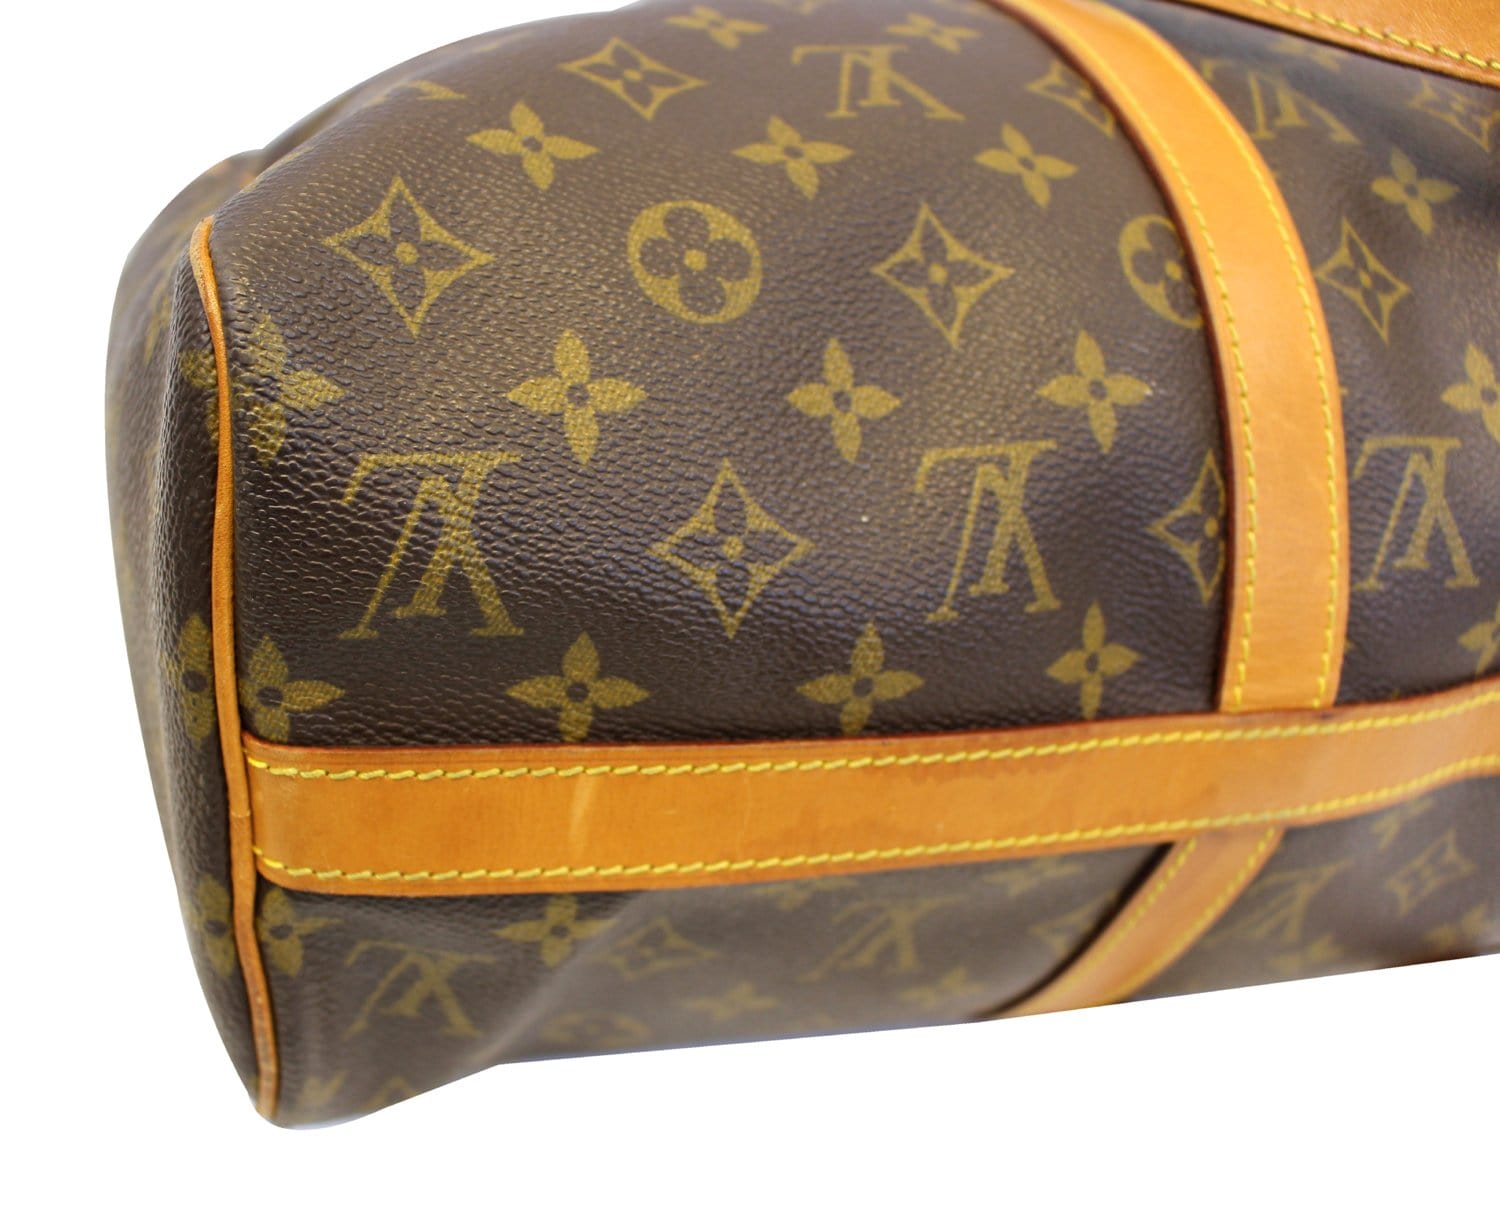 Designer Exchange Ltd - The perfect over night LV ⭐ . . Payment plans  available online!  /products/louis-vuitton-monogram-sac-flanerie-45-ar0975